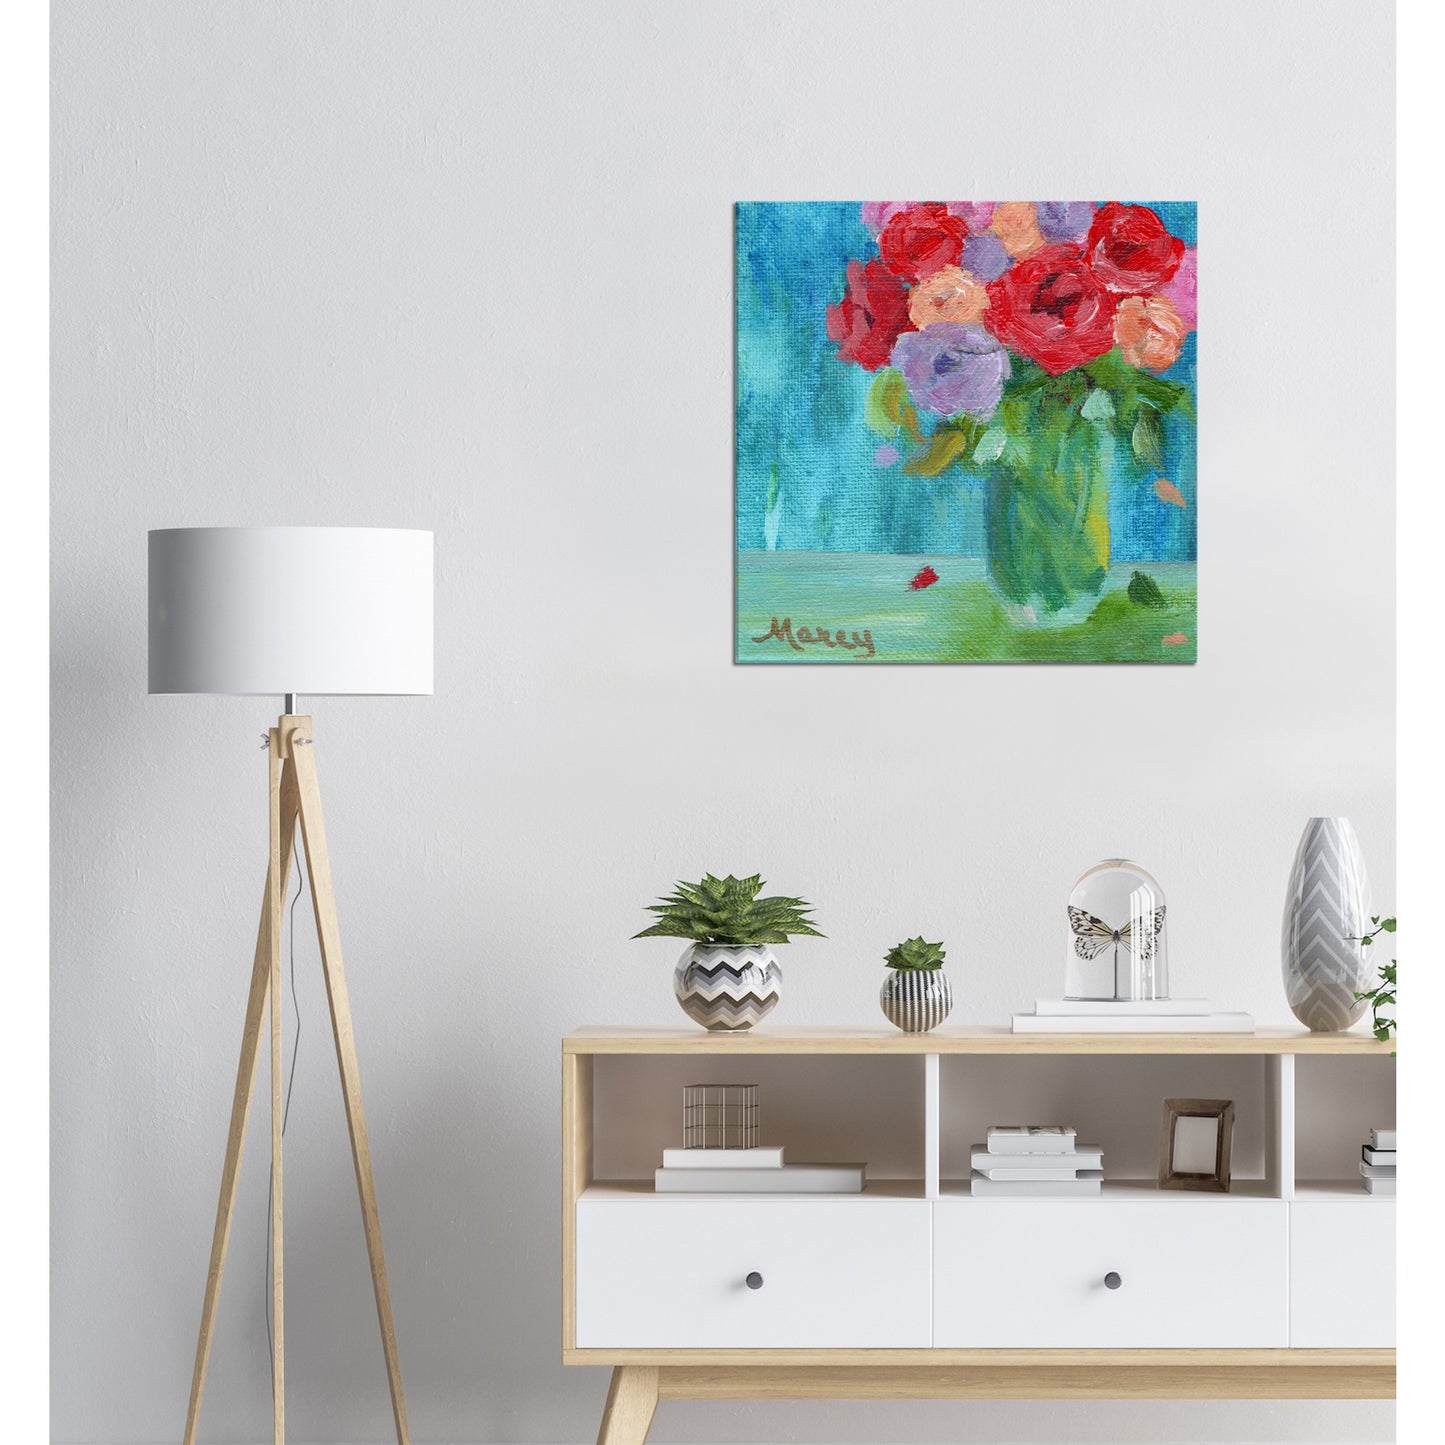 Impressionistic Fresh Roses in a Glass Vase in Cool Colors on Stretched Canvas